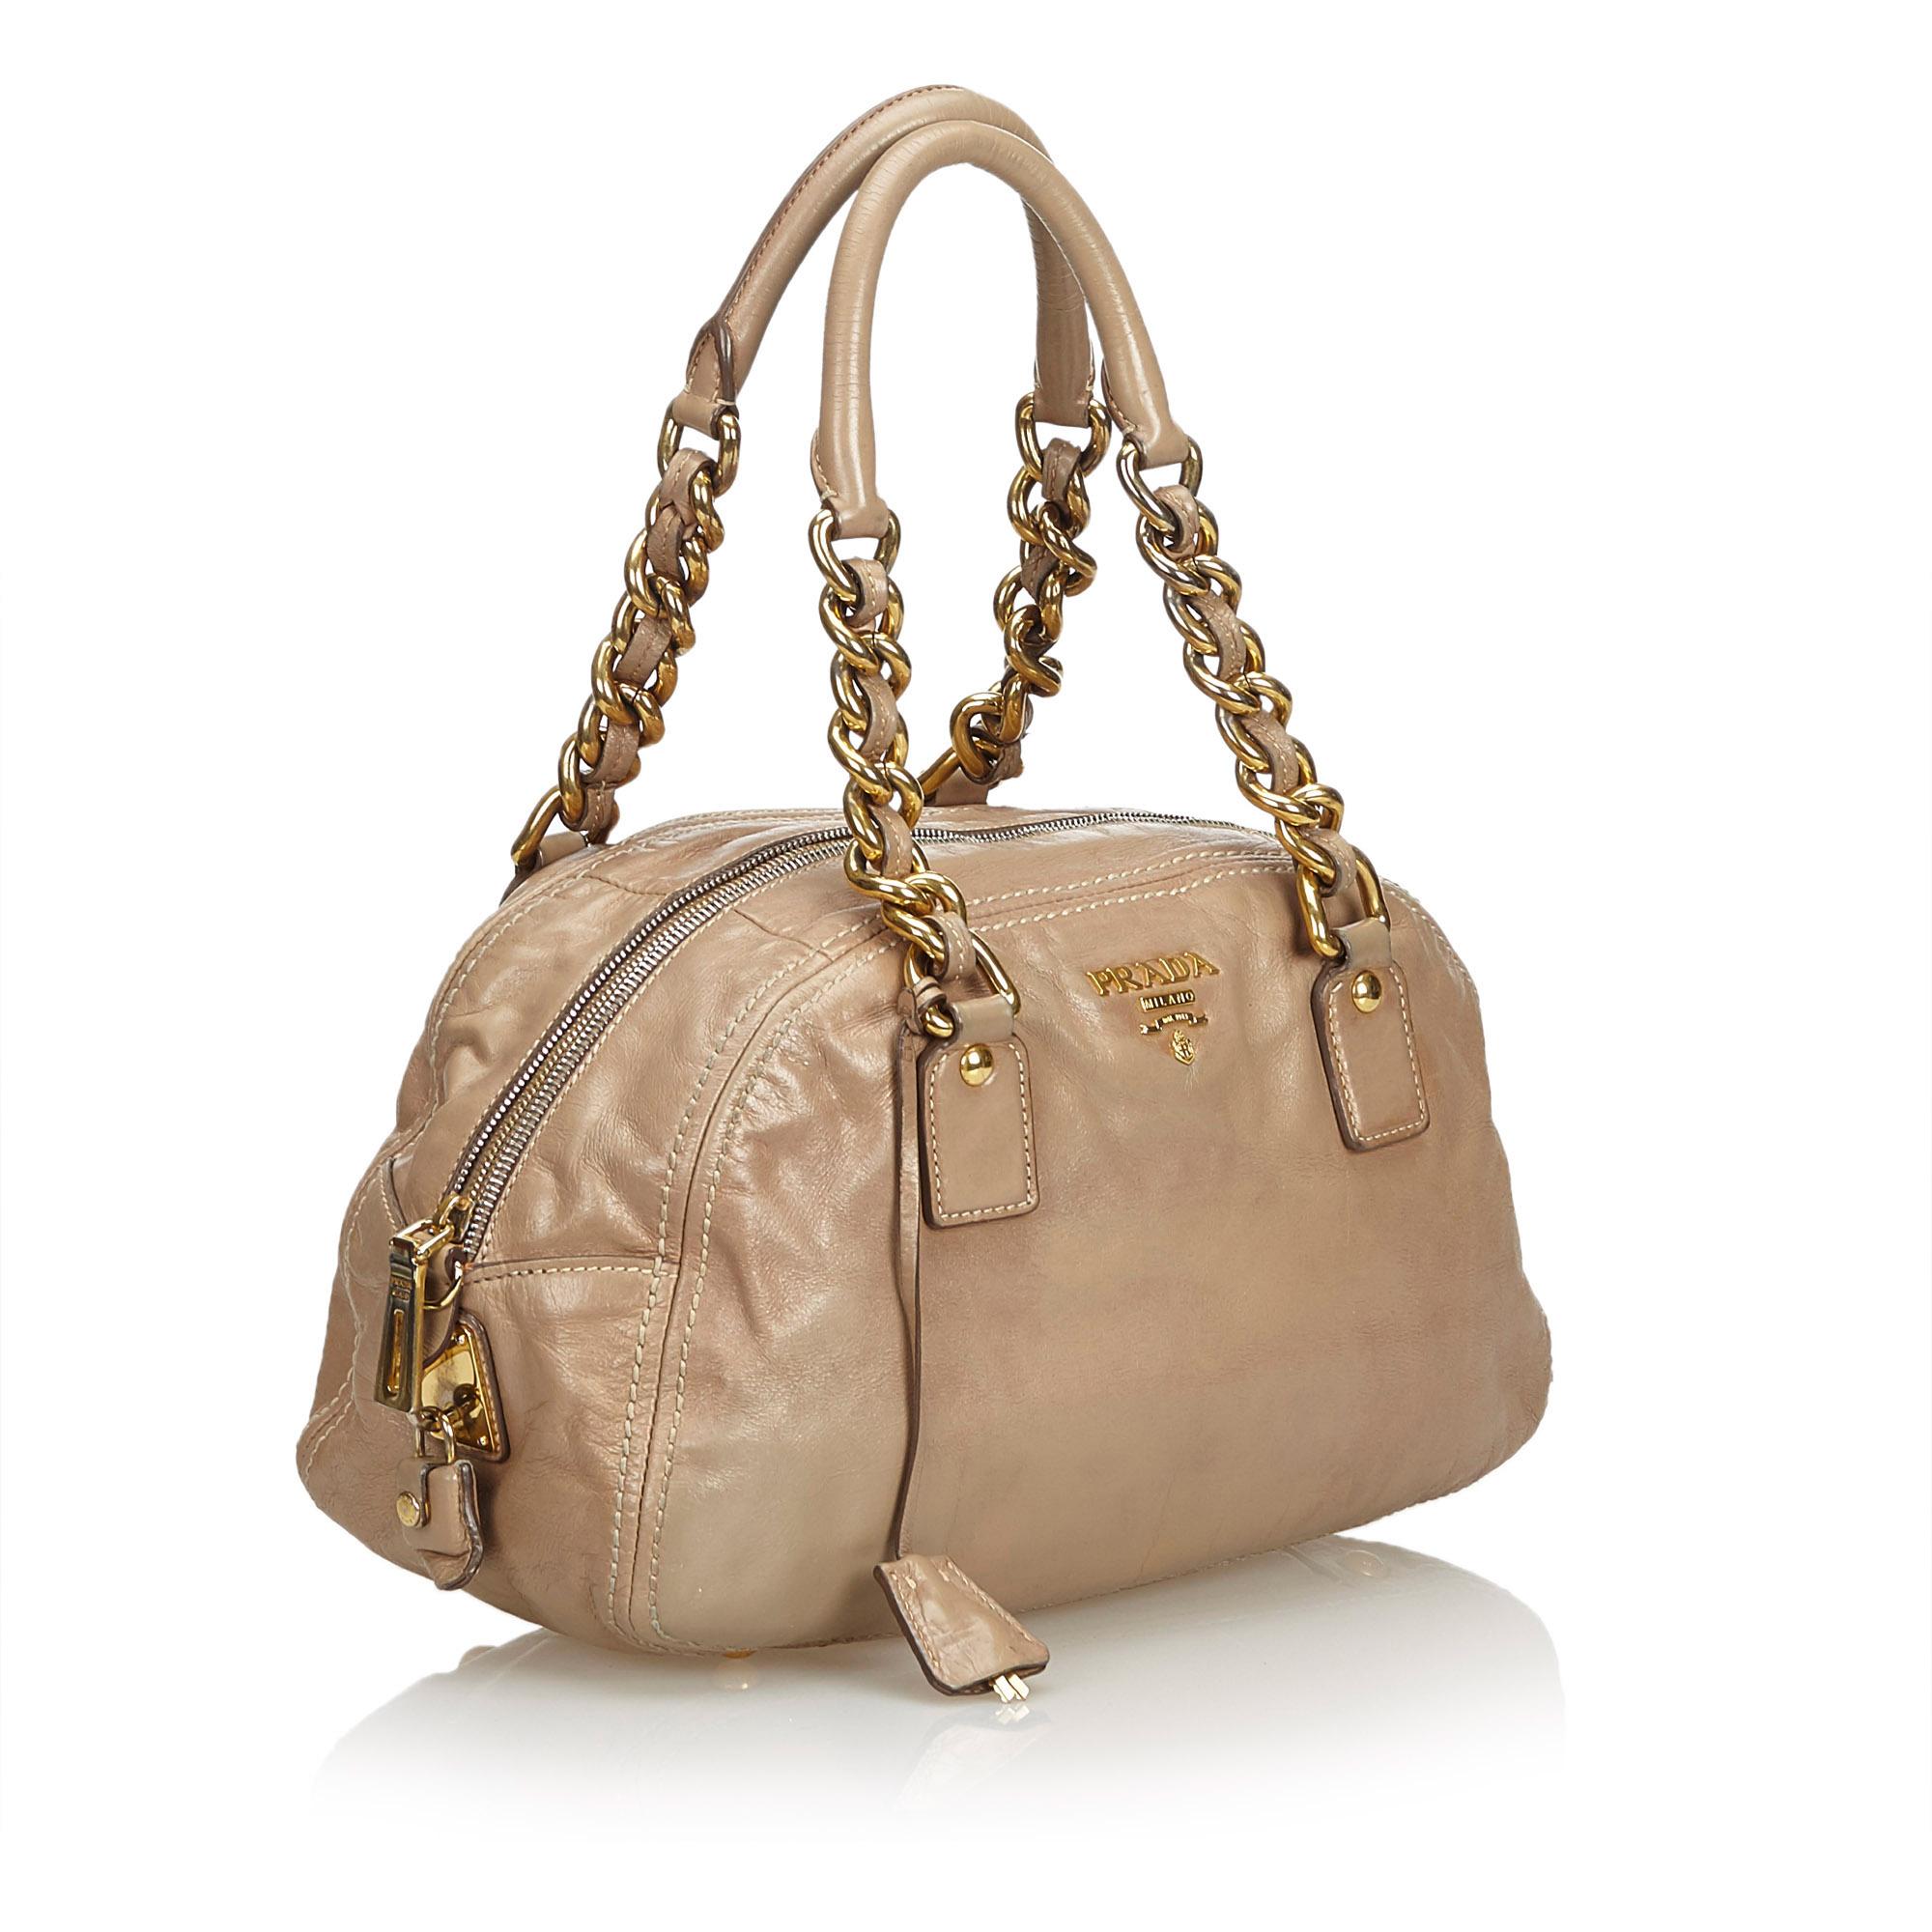 This handbag features a leather body, a leather strap with gold-tone metal chain details, a top zip closure, and interior zip and slip pockets. It carries as B condition rating.

Inclusions: 
Dust Bag
Authenticity Card

Dimensions:
Length: 19.00